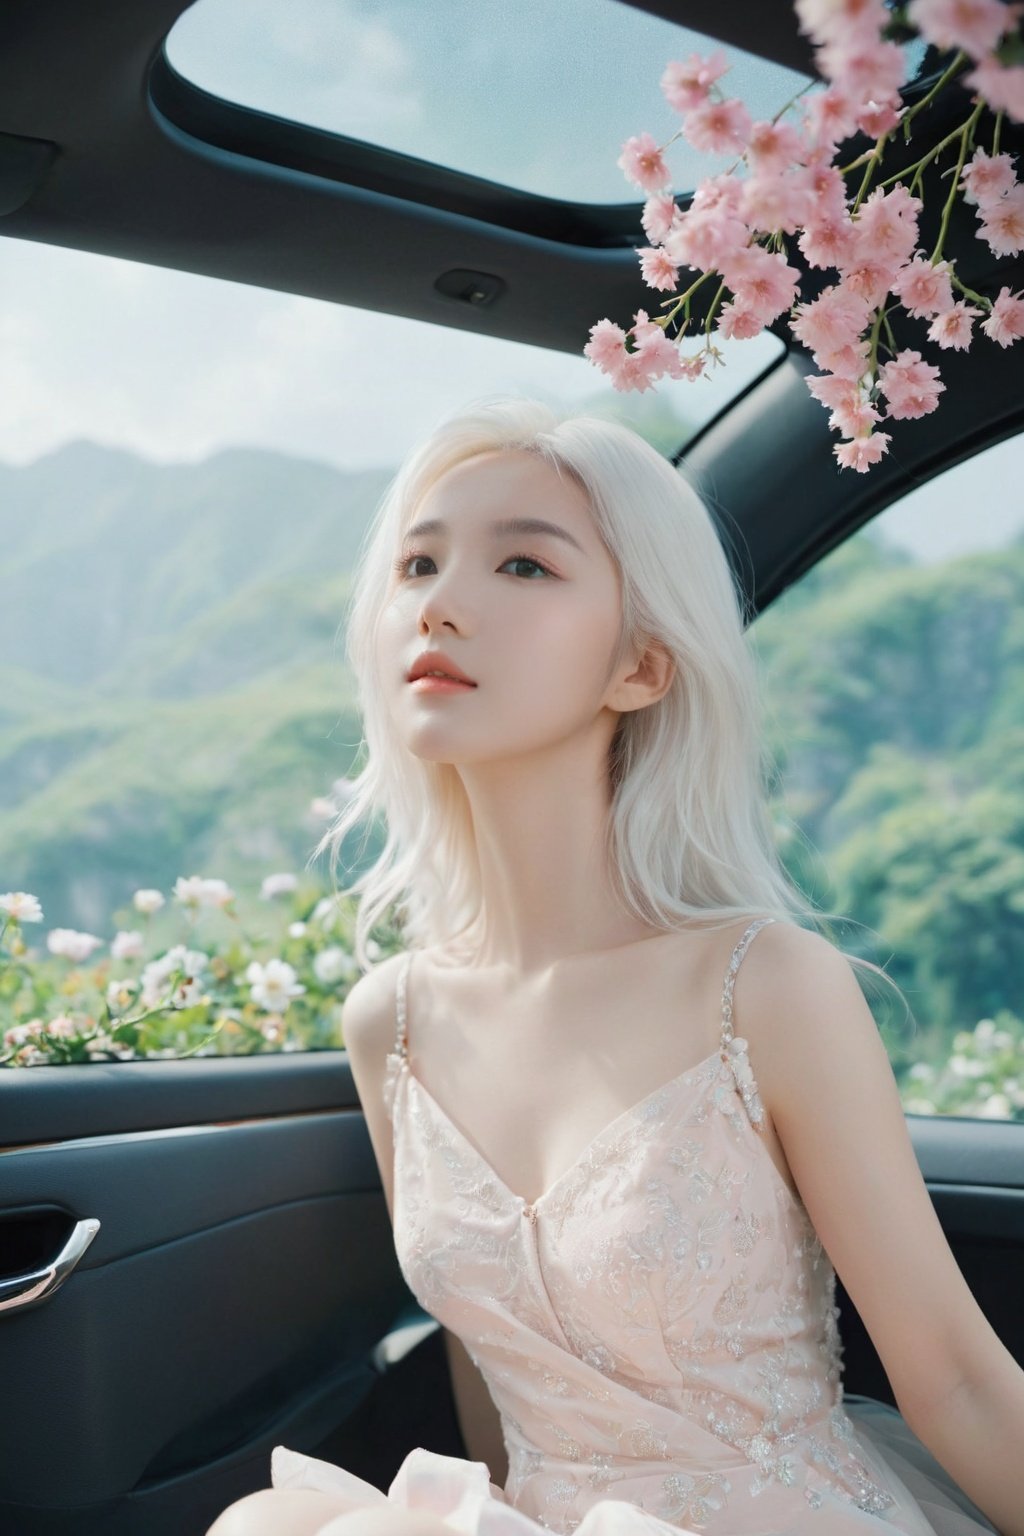 ethereal fantasy concept art of cinematic film still, chinese girl, a girl with white hair sitting in car filled with flowers, art by Rinko Kawauchi, in the style of naturalistic poses, vacation dadcore, youth fulenergy, a cool expression, body extensions, flowersin the sky, ****og film, super detail, dreamy lofi photography, colourful, covered in flowers andvines, Inside view, shot on fujifilm XT4 . shallow depth of field, vignette, highly detailed, high budget, bokeh, cinemascope, moody, epic, gorgeous, film grain, grainy . magnificent, celestial, ethereal, painterly, epic, majestic, magical, fantasy art, cover art, dreamy
,monkren